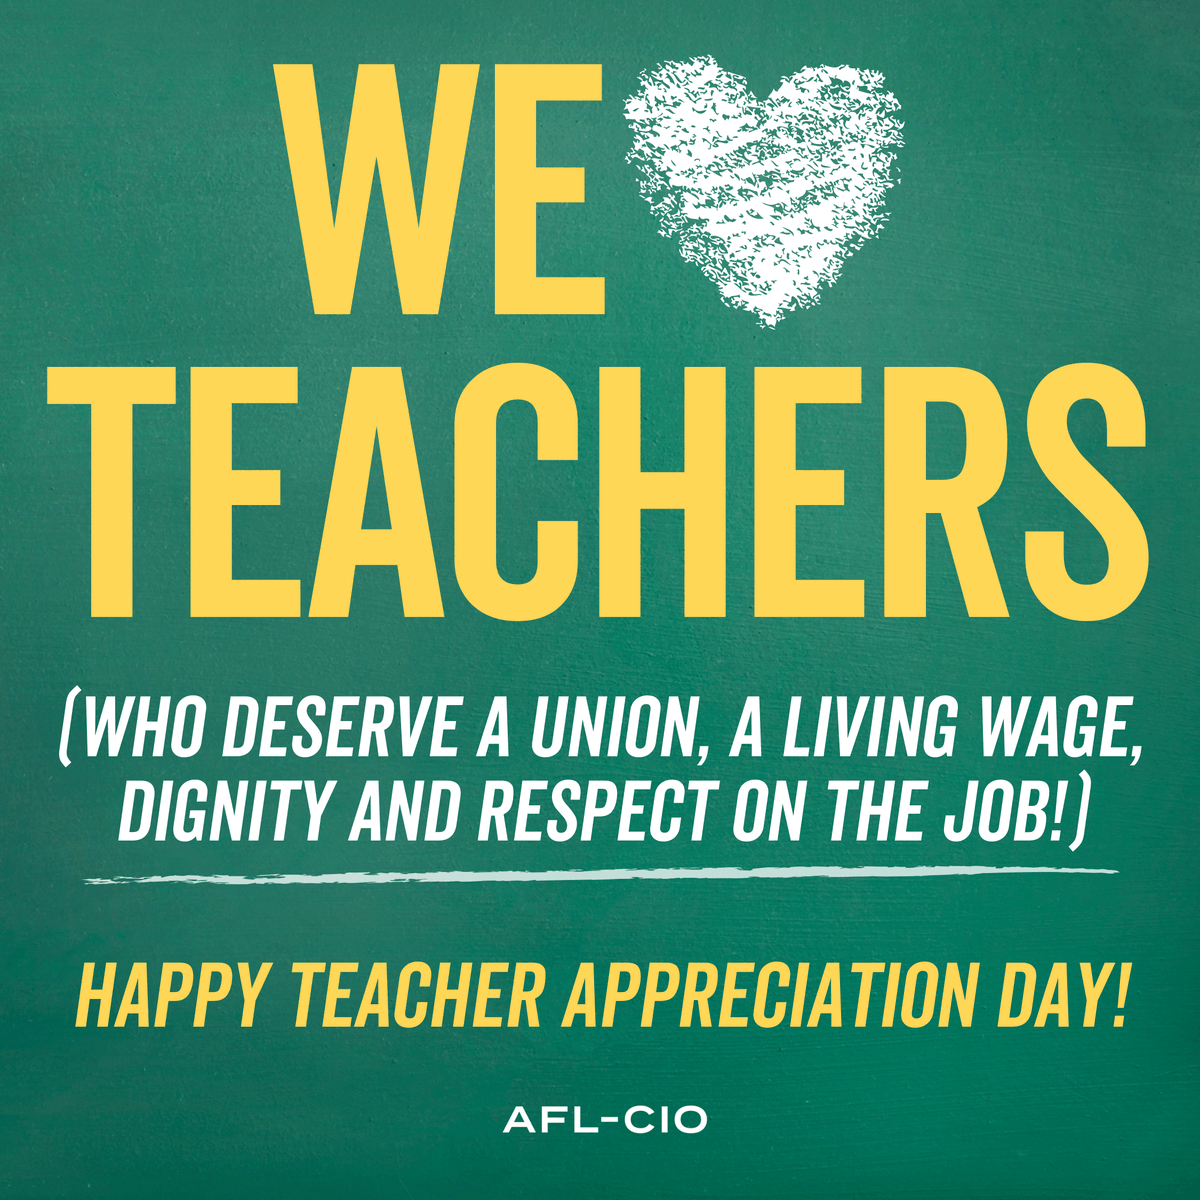 Teachers go above and beyond in the classroom every single day & our appreciation for them is so much more than face-value. We will keep fighting until every single teacher has the opportunity to have a strong union contract with living wages & good benefits.